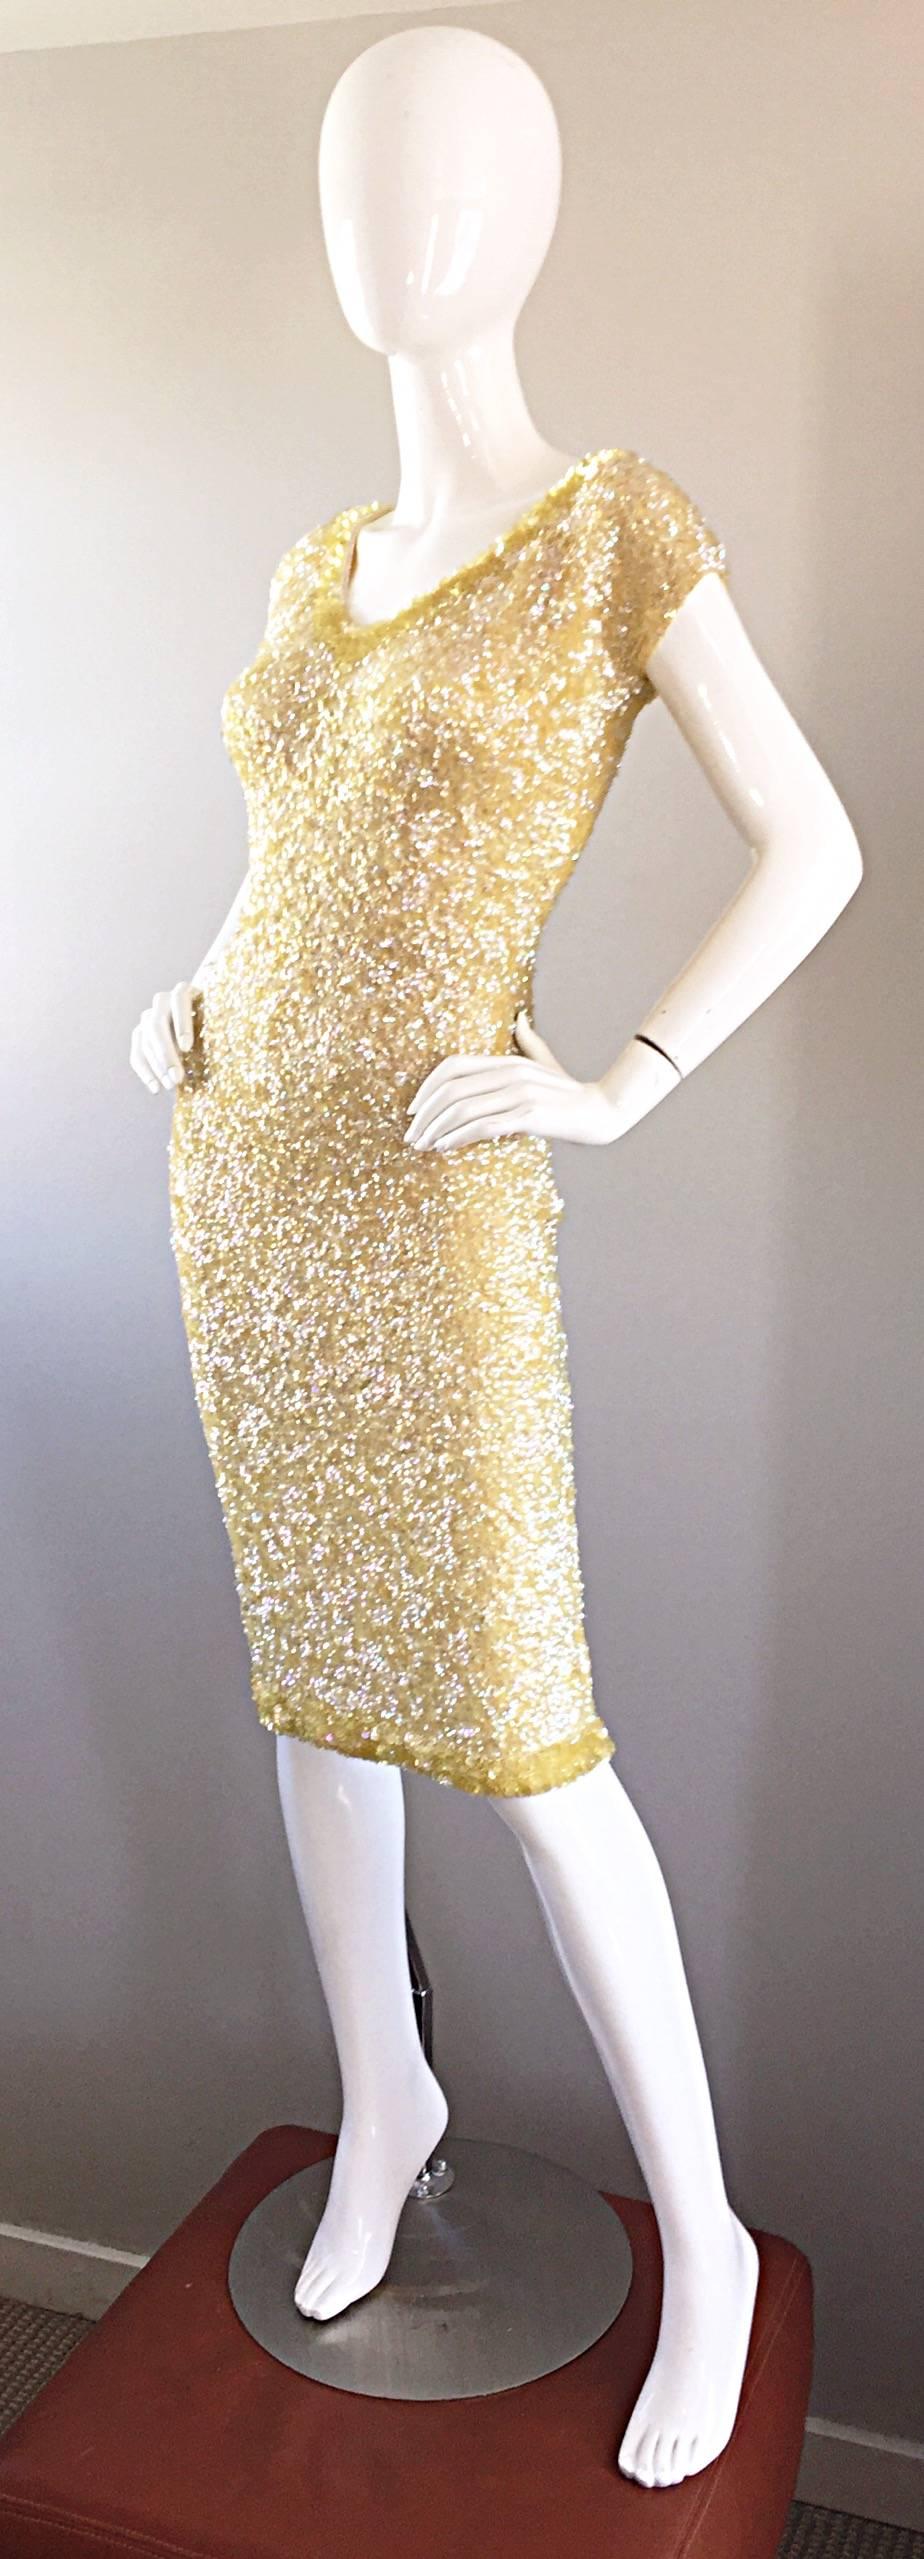 Women's 1950s Gene Shelly's Pale Yellow Fully Sequined 50s Vintage Wool Wiggle Dress